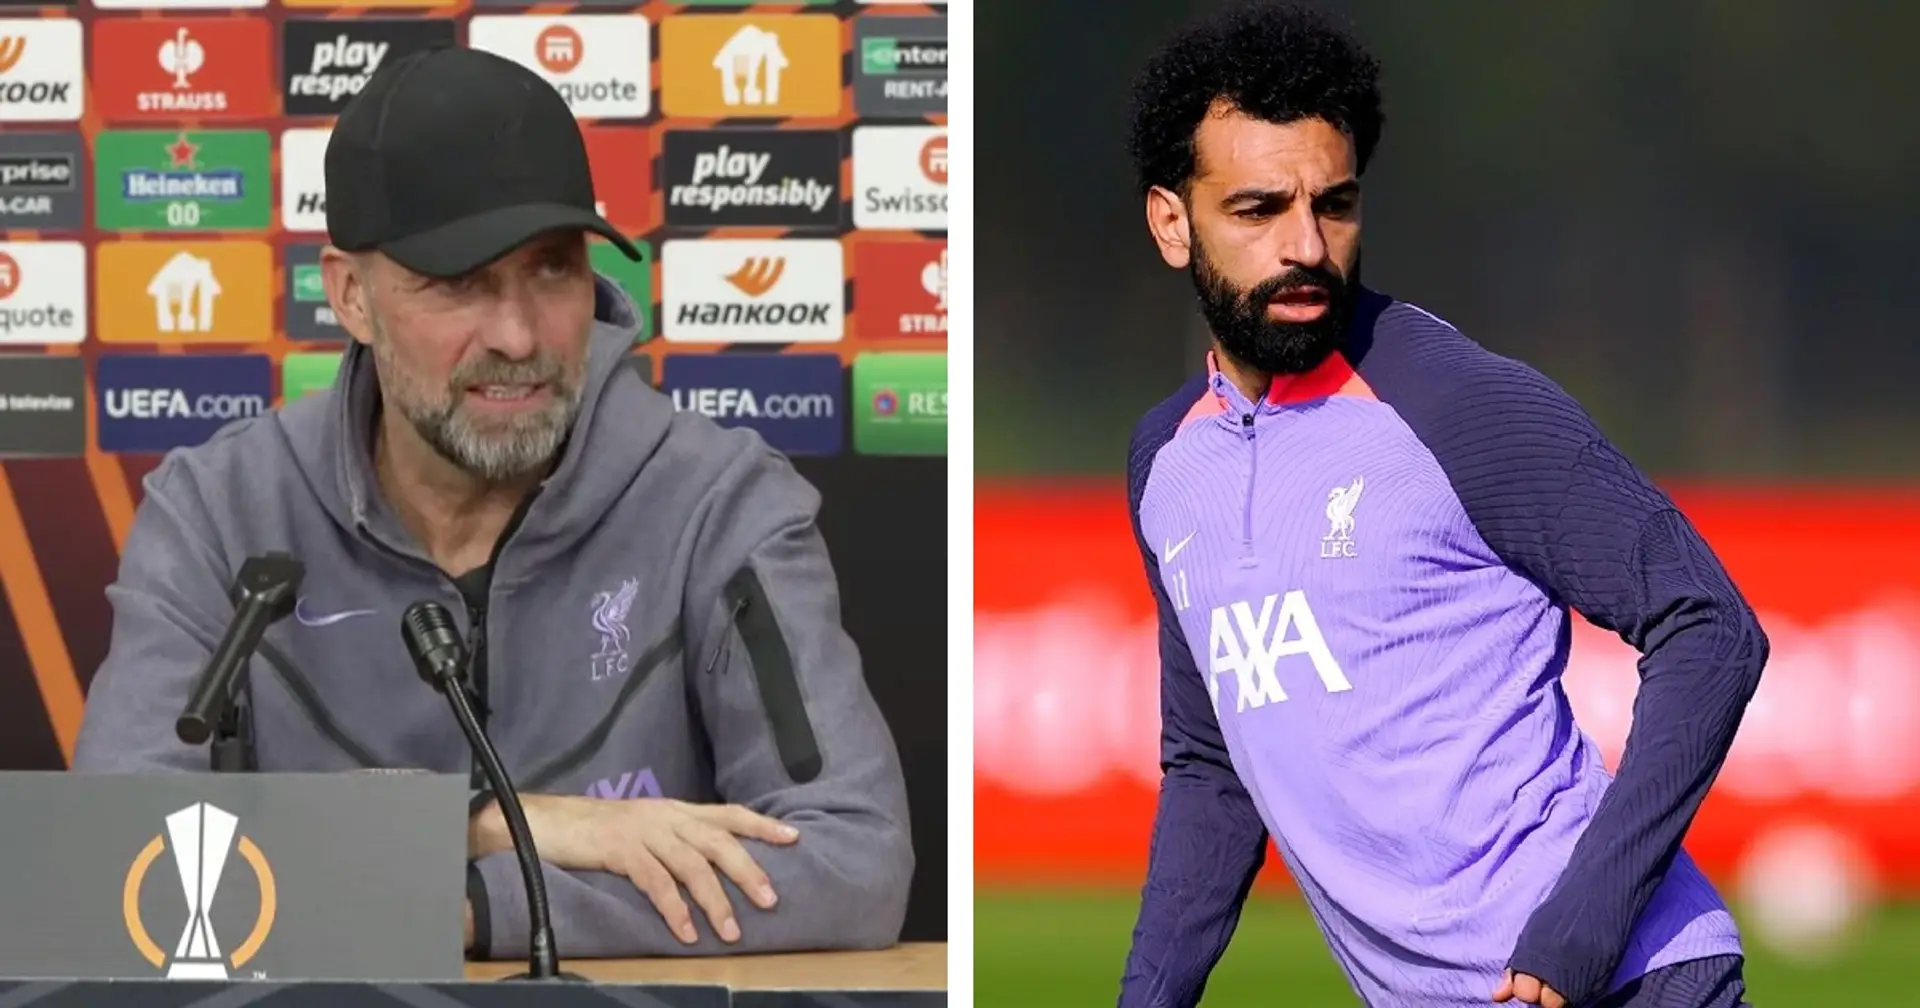 'Only two days in team training': Klopp on Salah getting called up by Egypt for upcoming friendlies despite Liverpool request